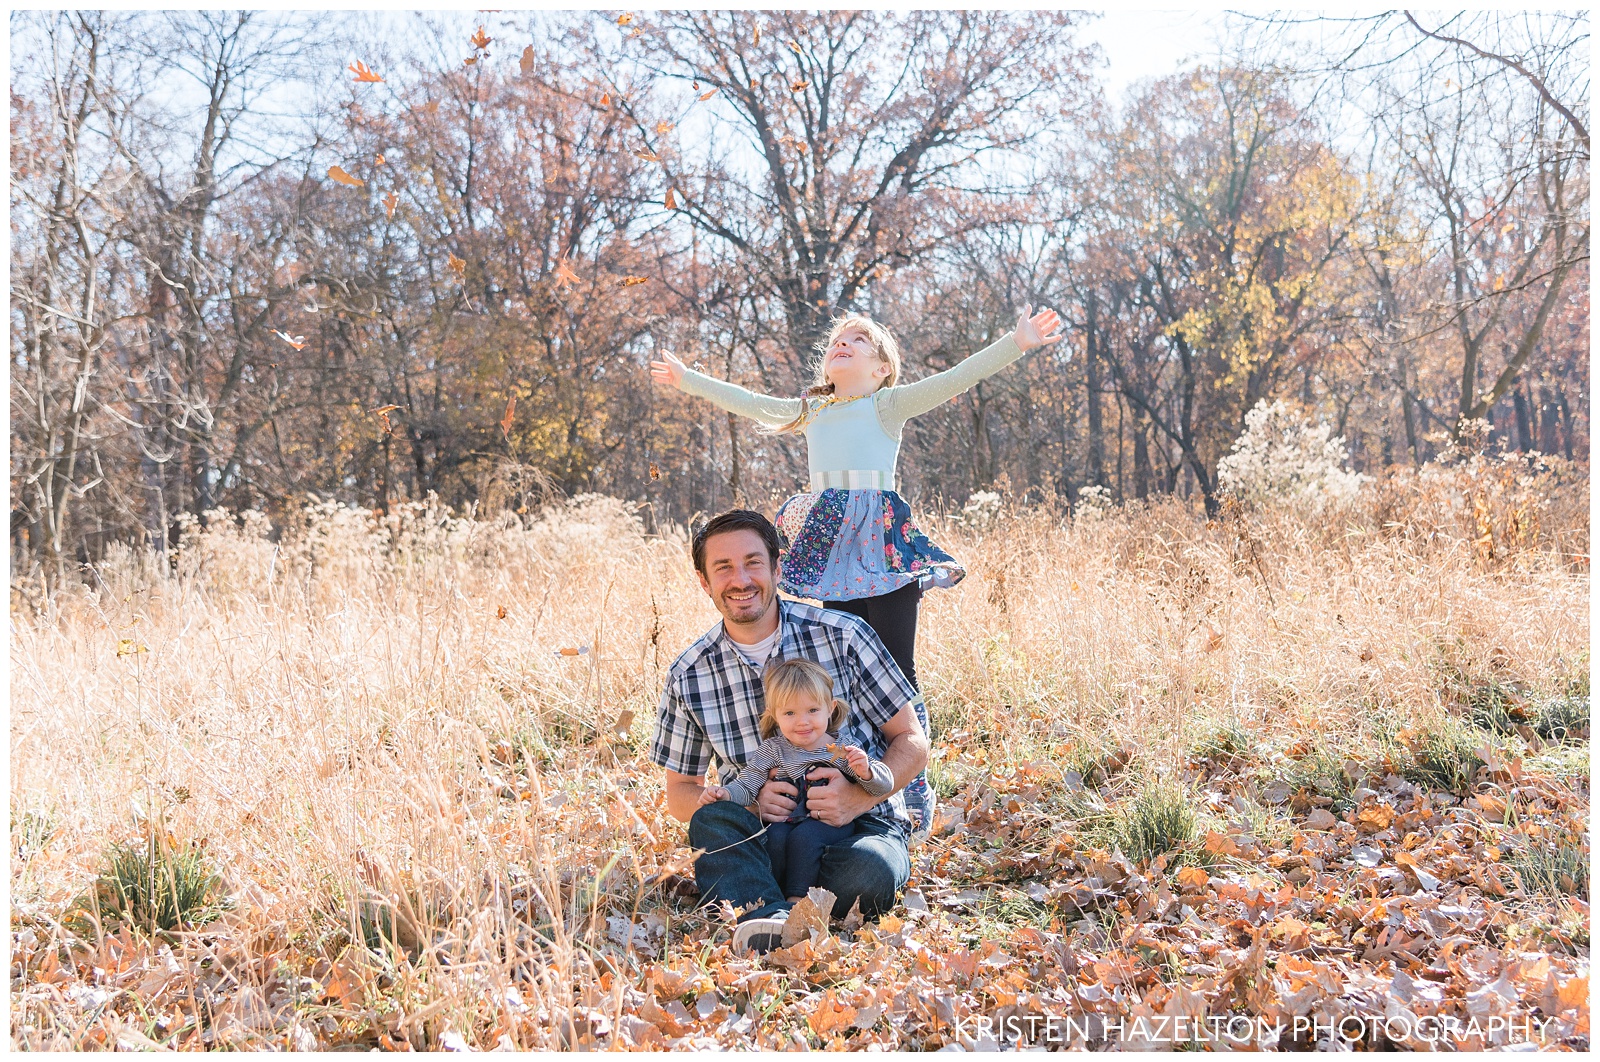 Family photos of a Dad with his two young daughters